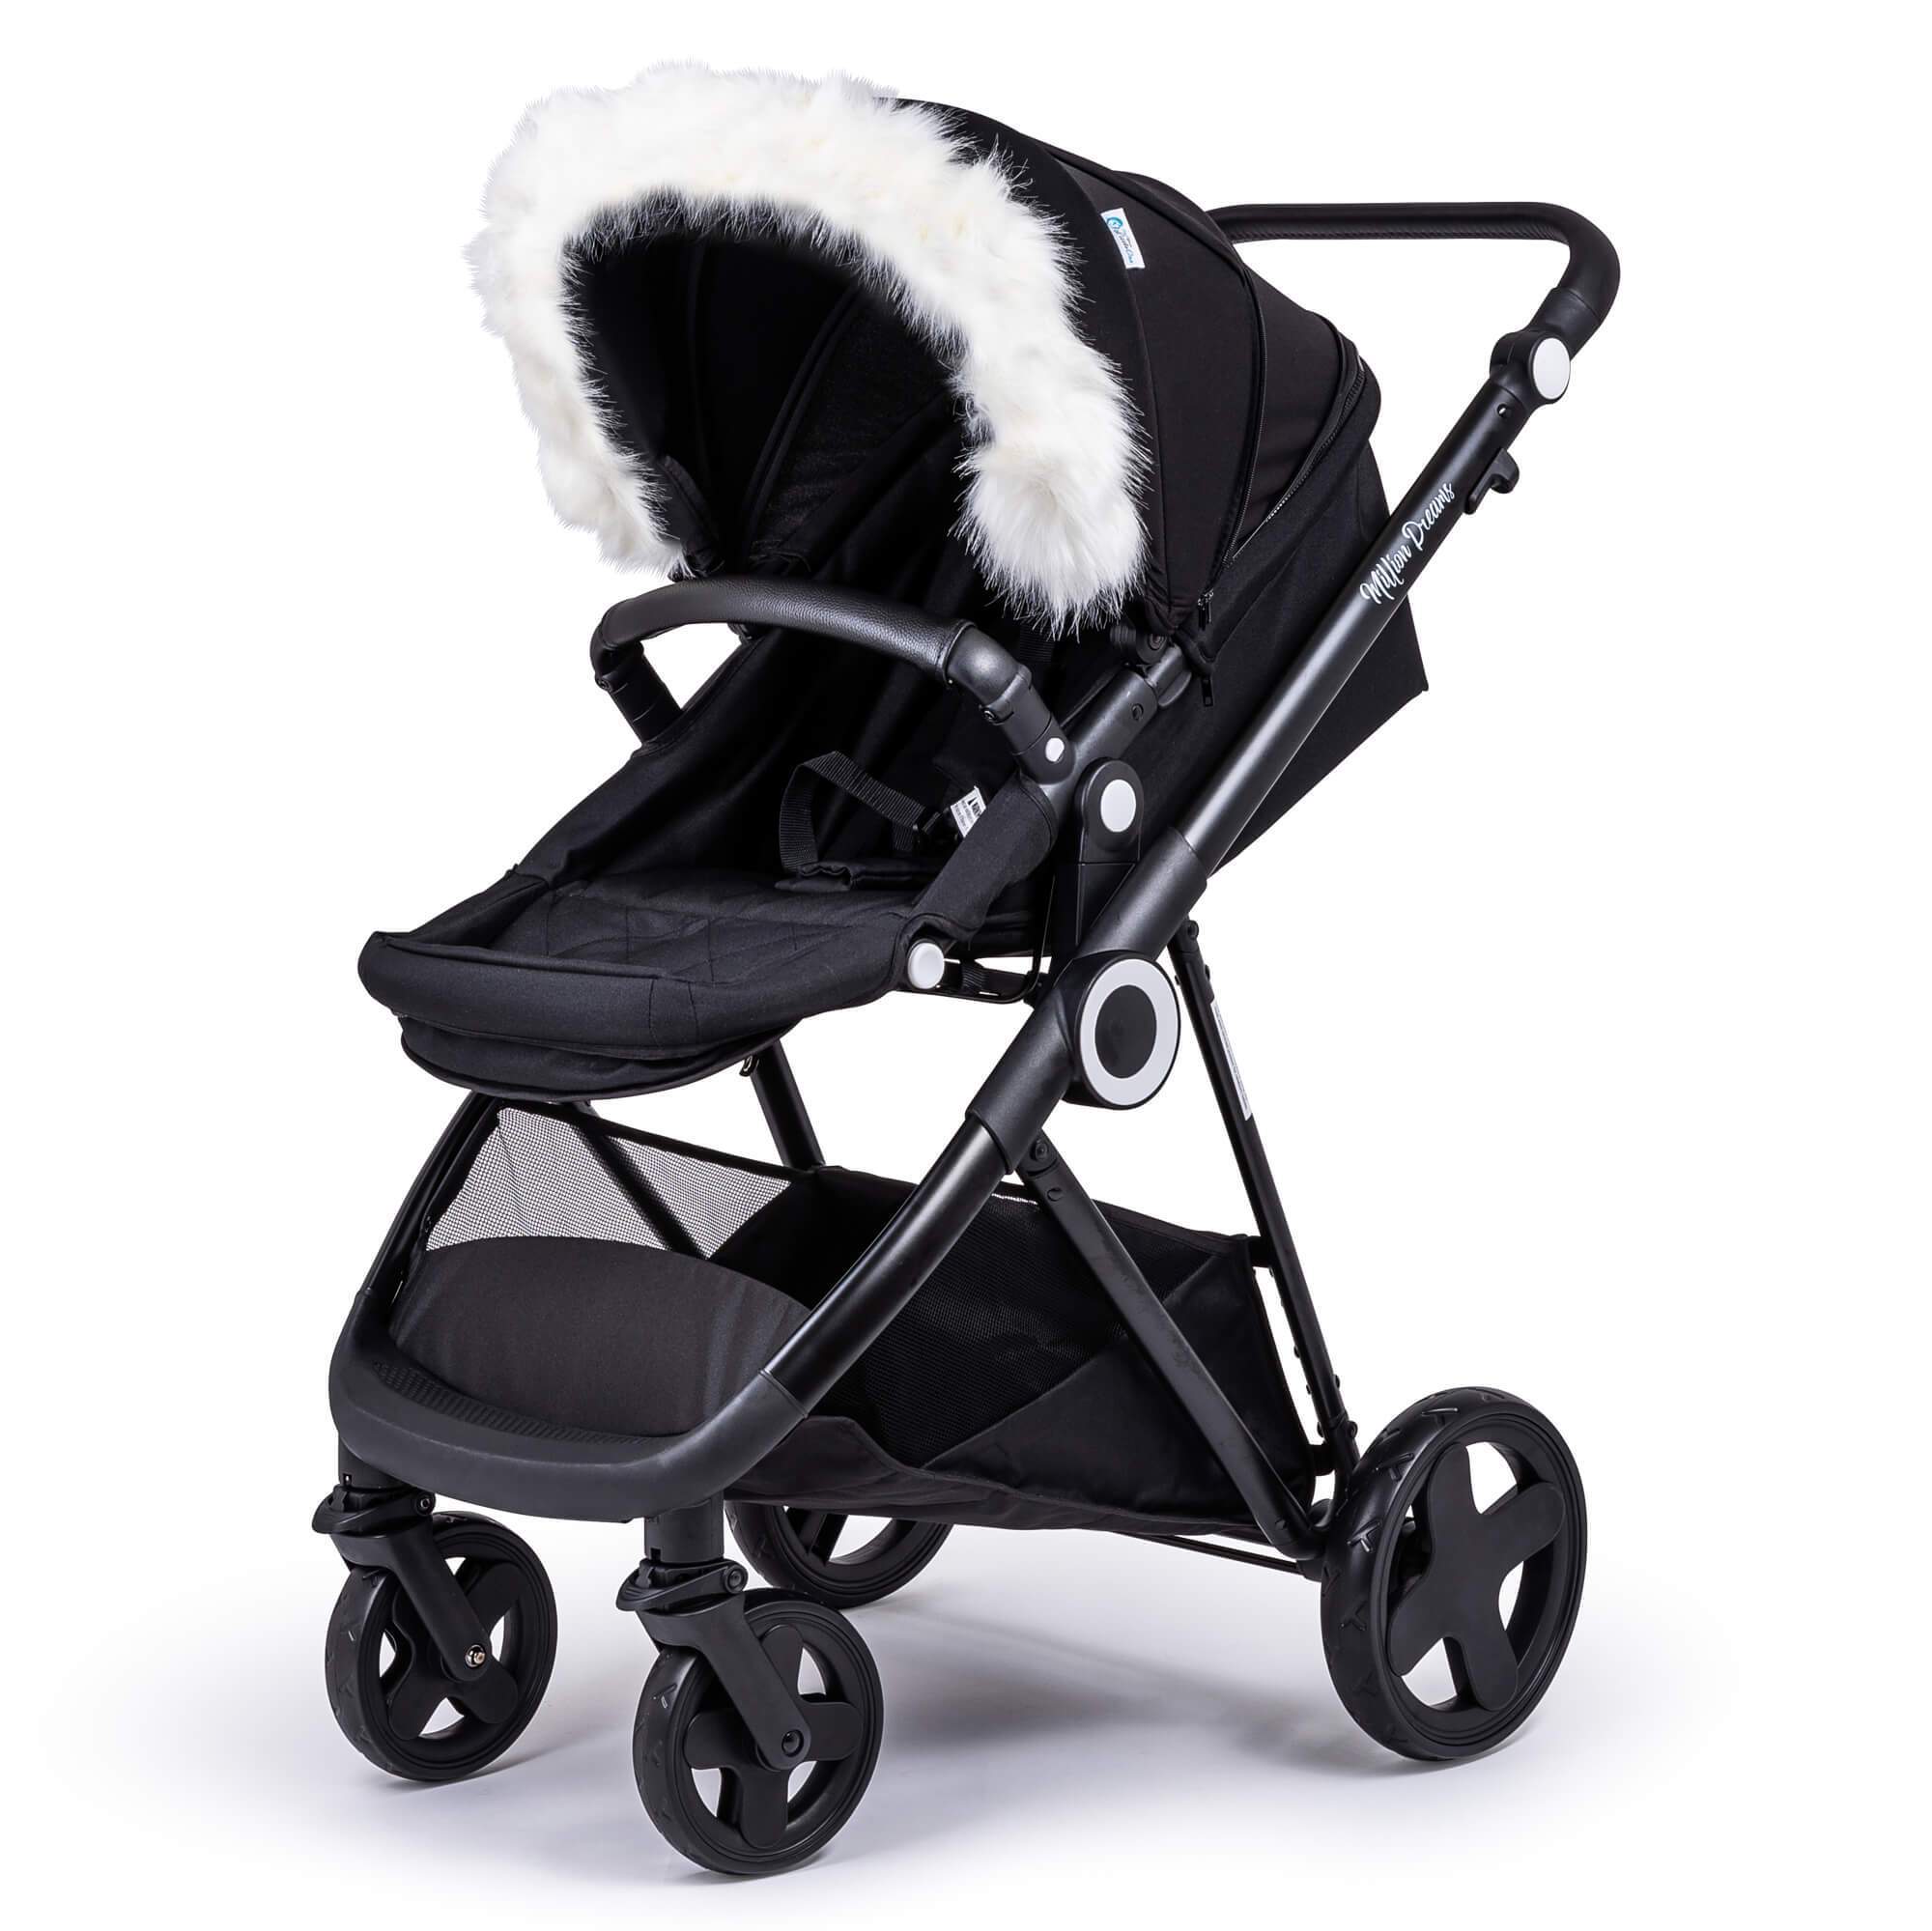 Pram Fur Hood Trim Attachment For Pushchair Compatible with Kiddy - White / Fits All Models | For Your Little One